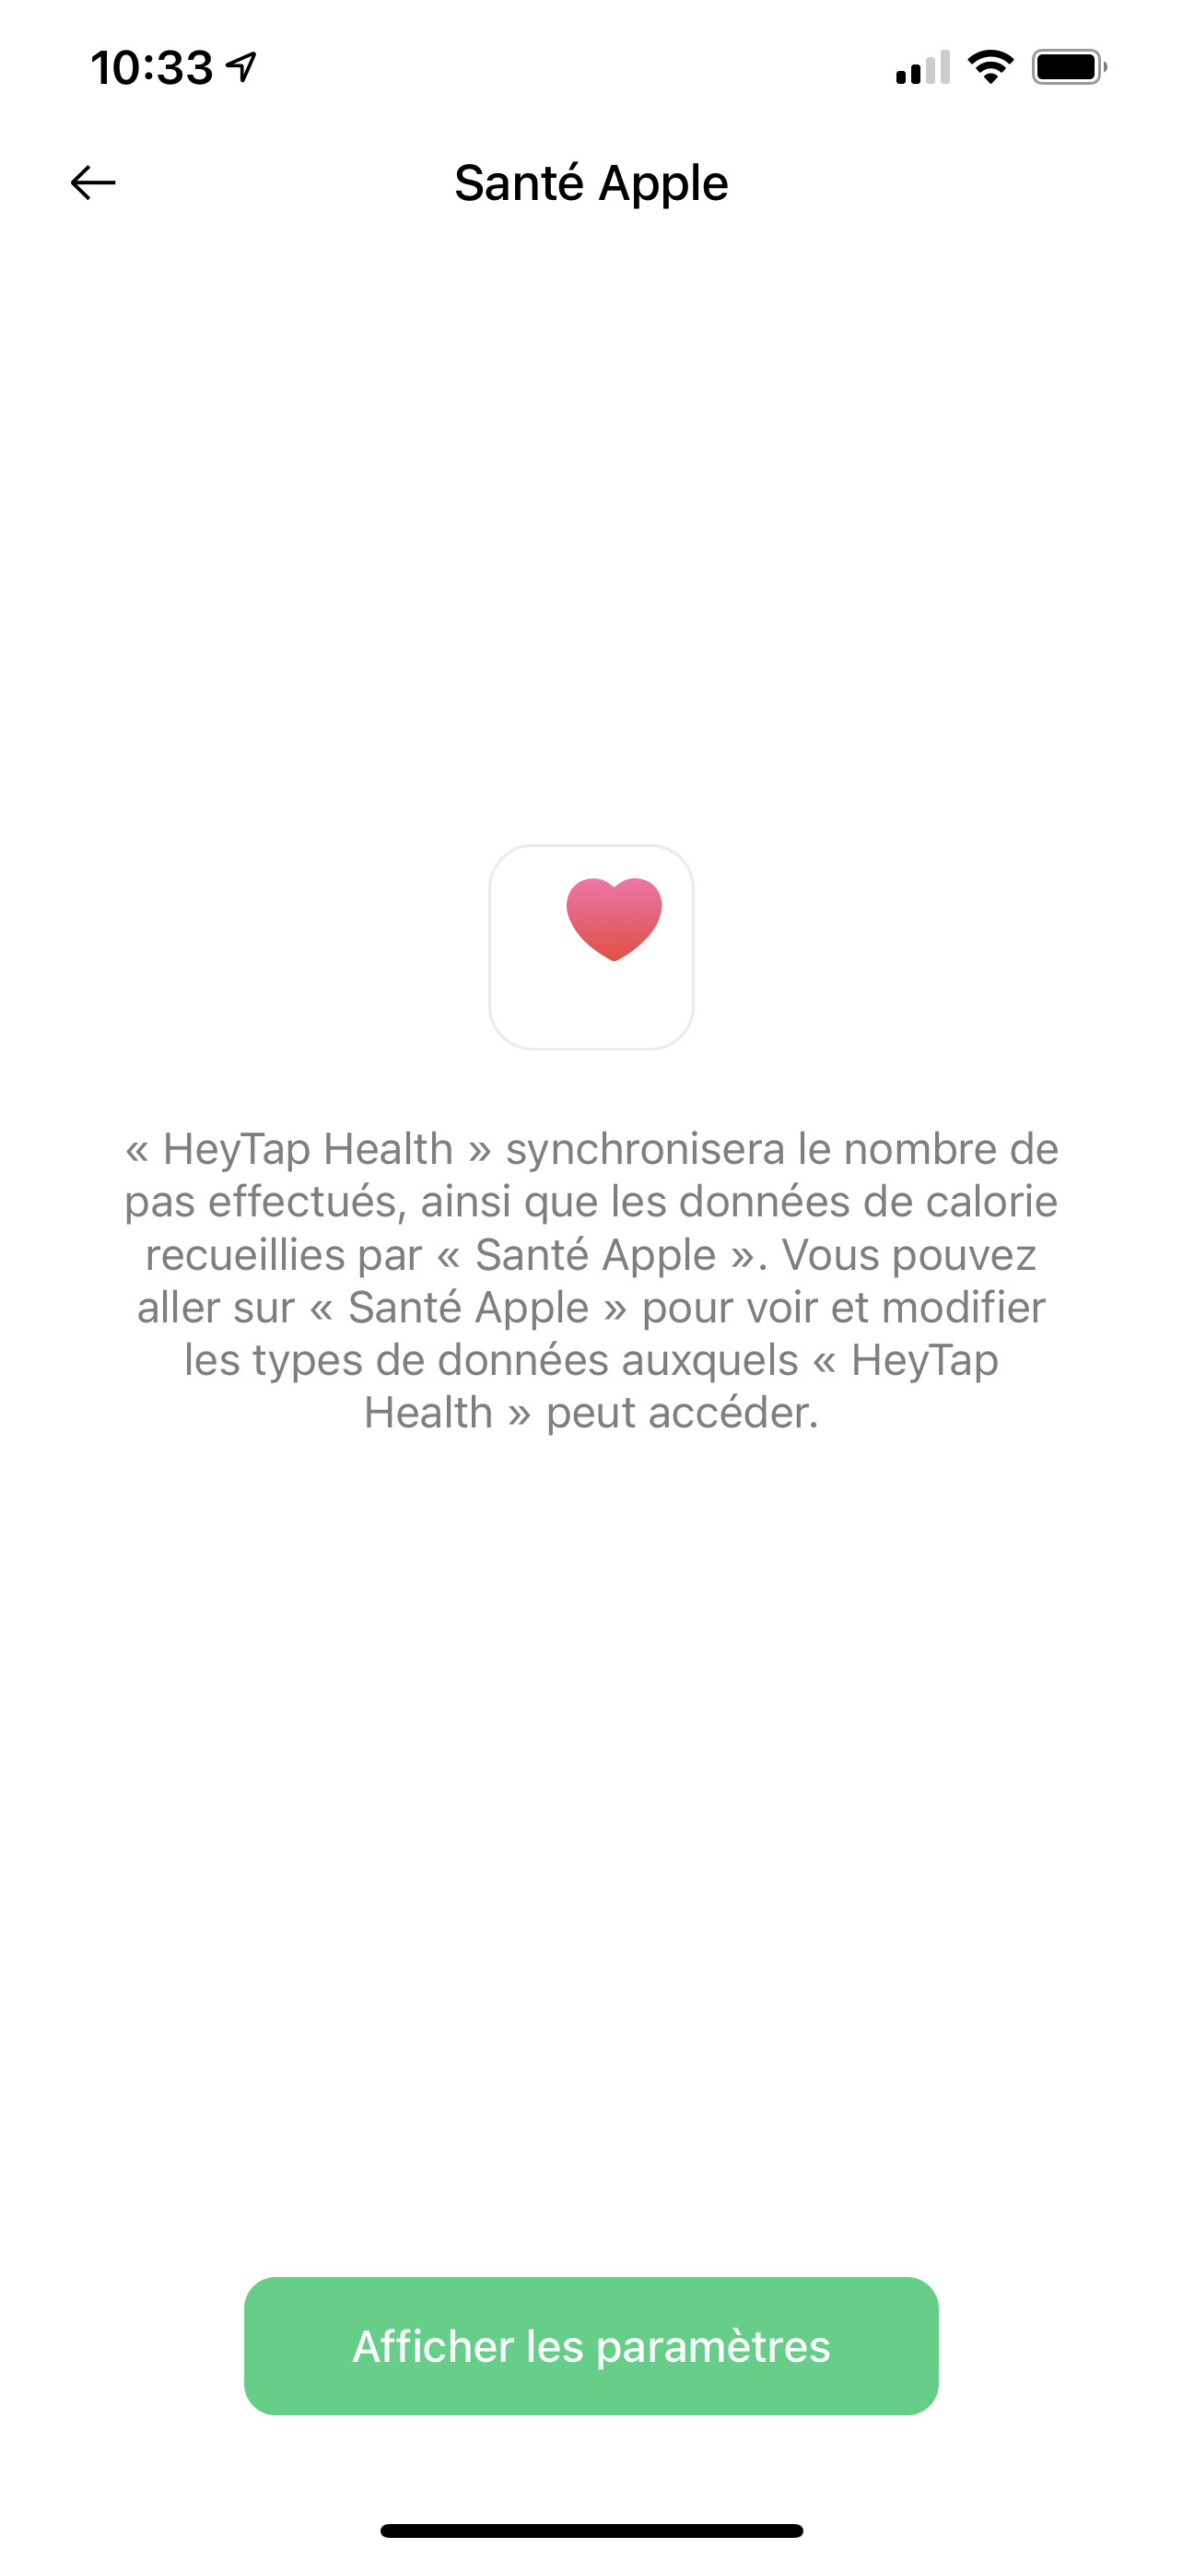 L'application HeyTap Health sur iPhone // Source : Oppo